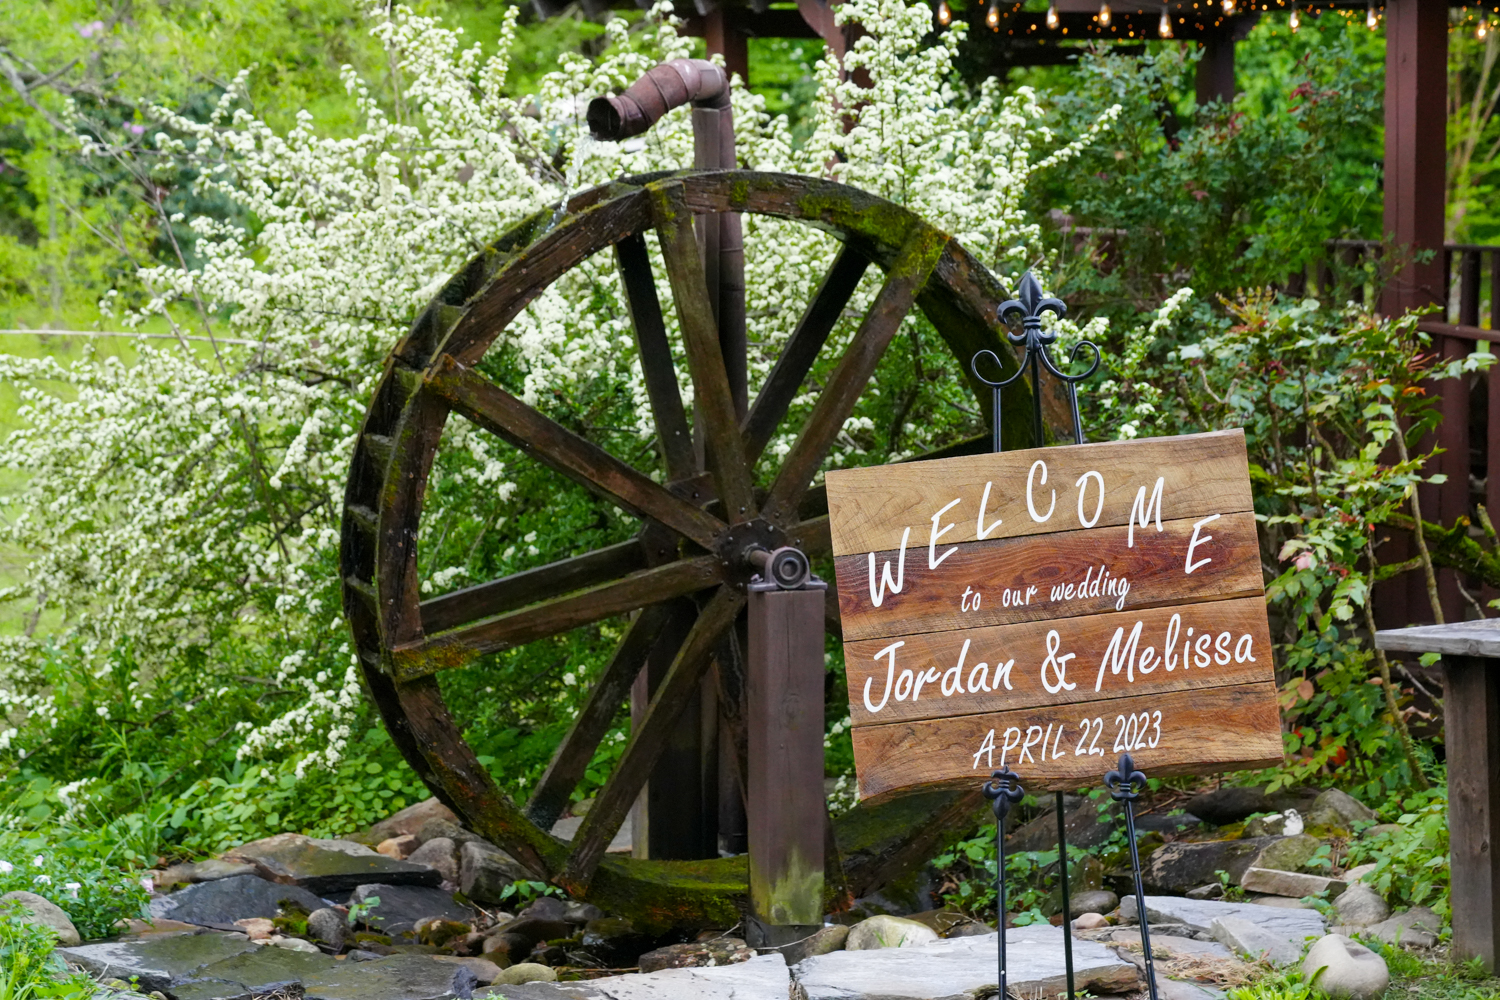 white pyracantha in bloom by a water wheel at the Honeysuckle Hills wedding venue in Pigeon Forge with a Welcome to our wedding sign on an easel